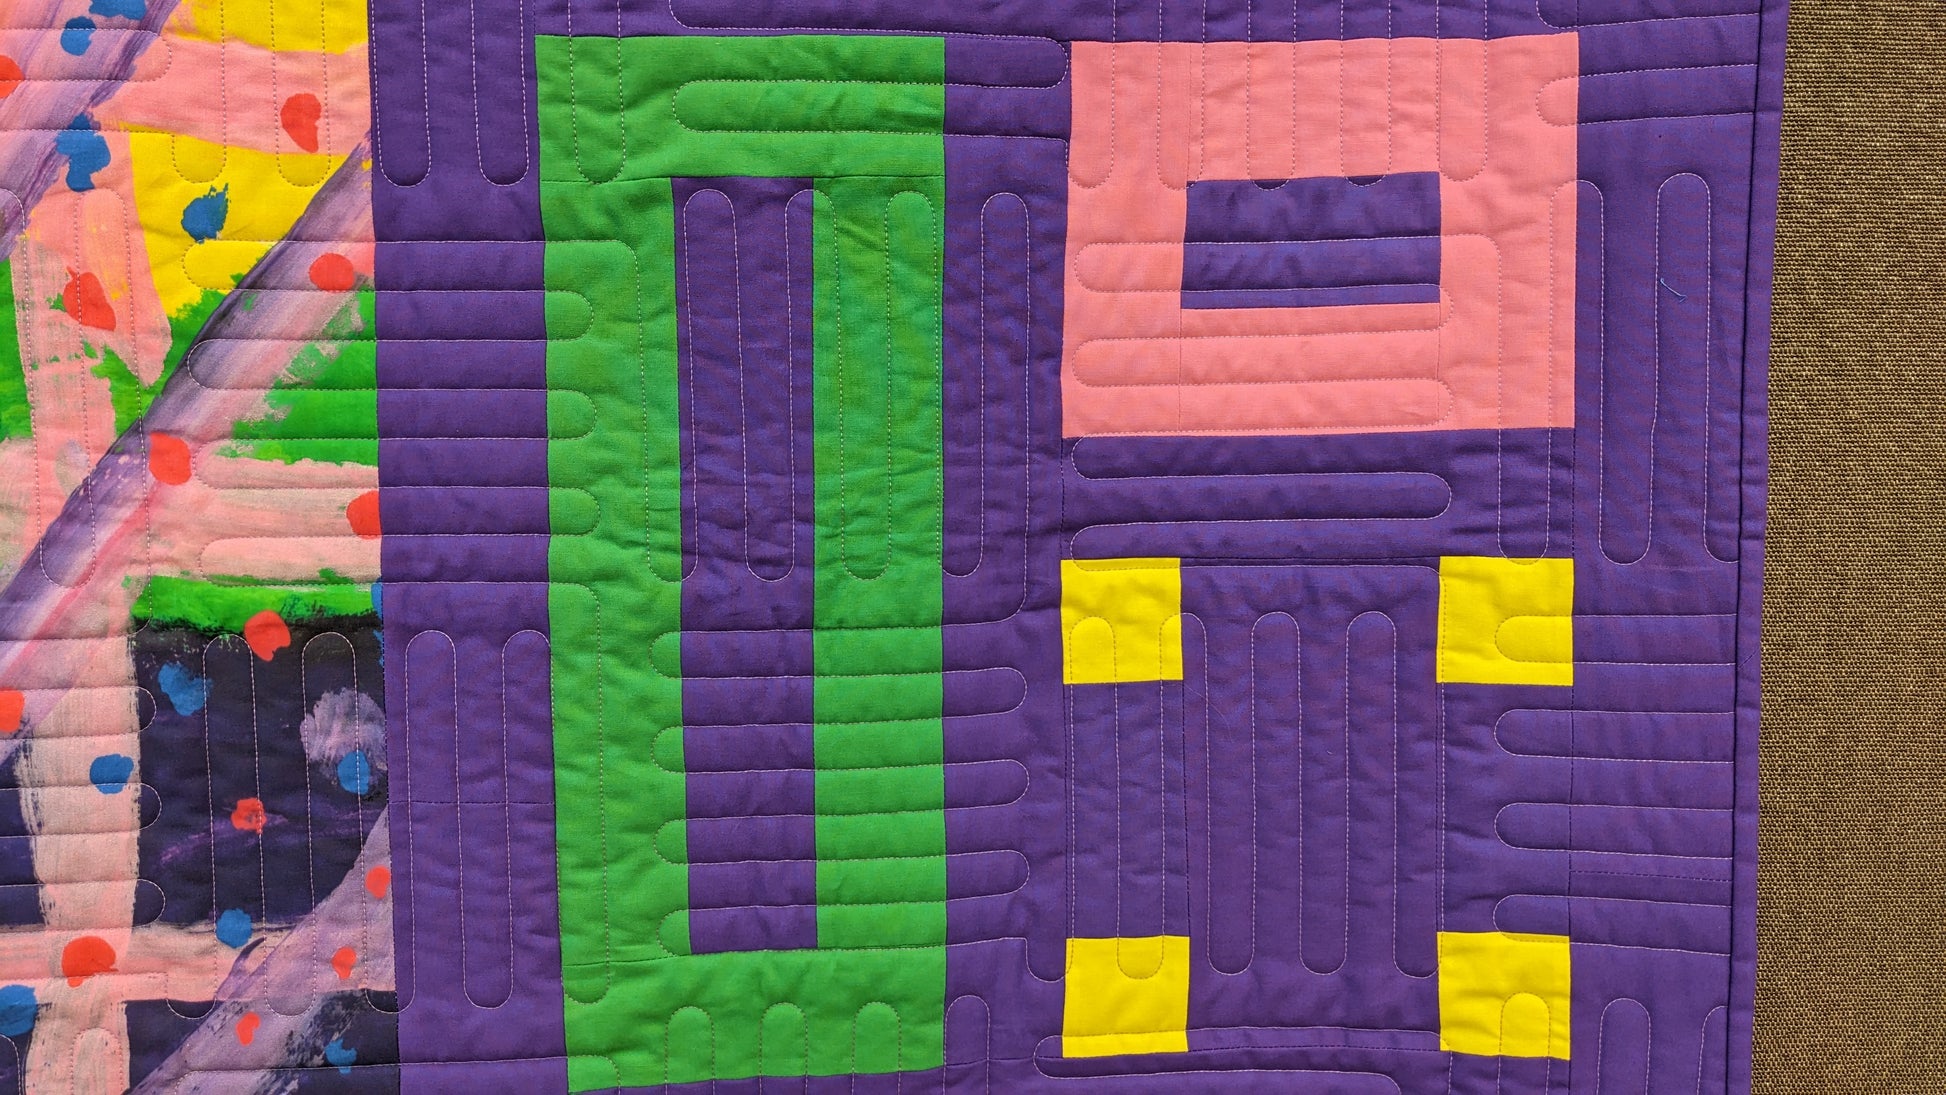 art quilt with purple, green, and yellow